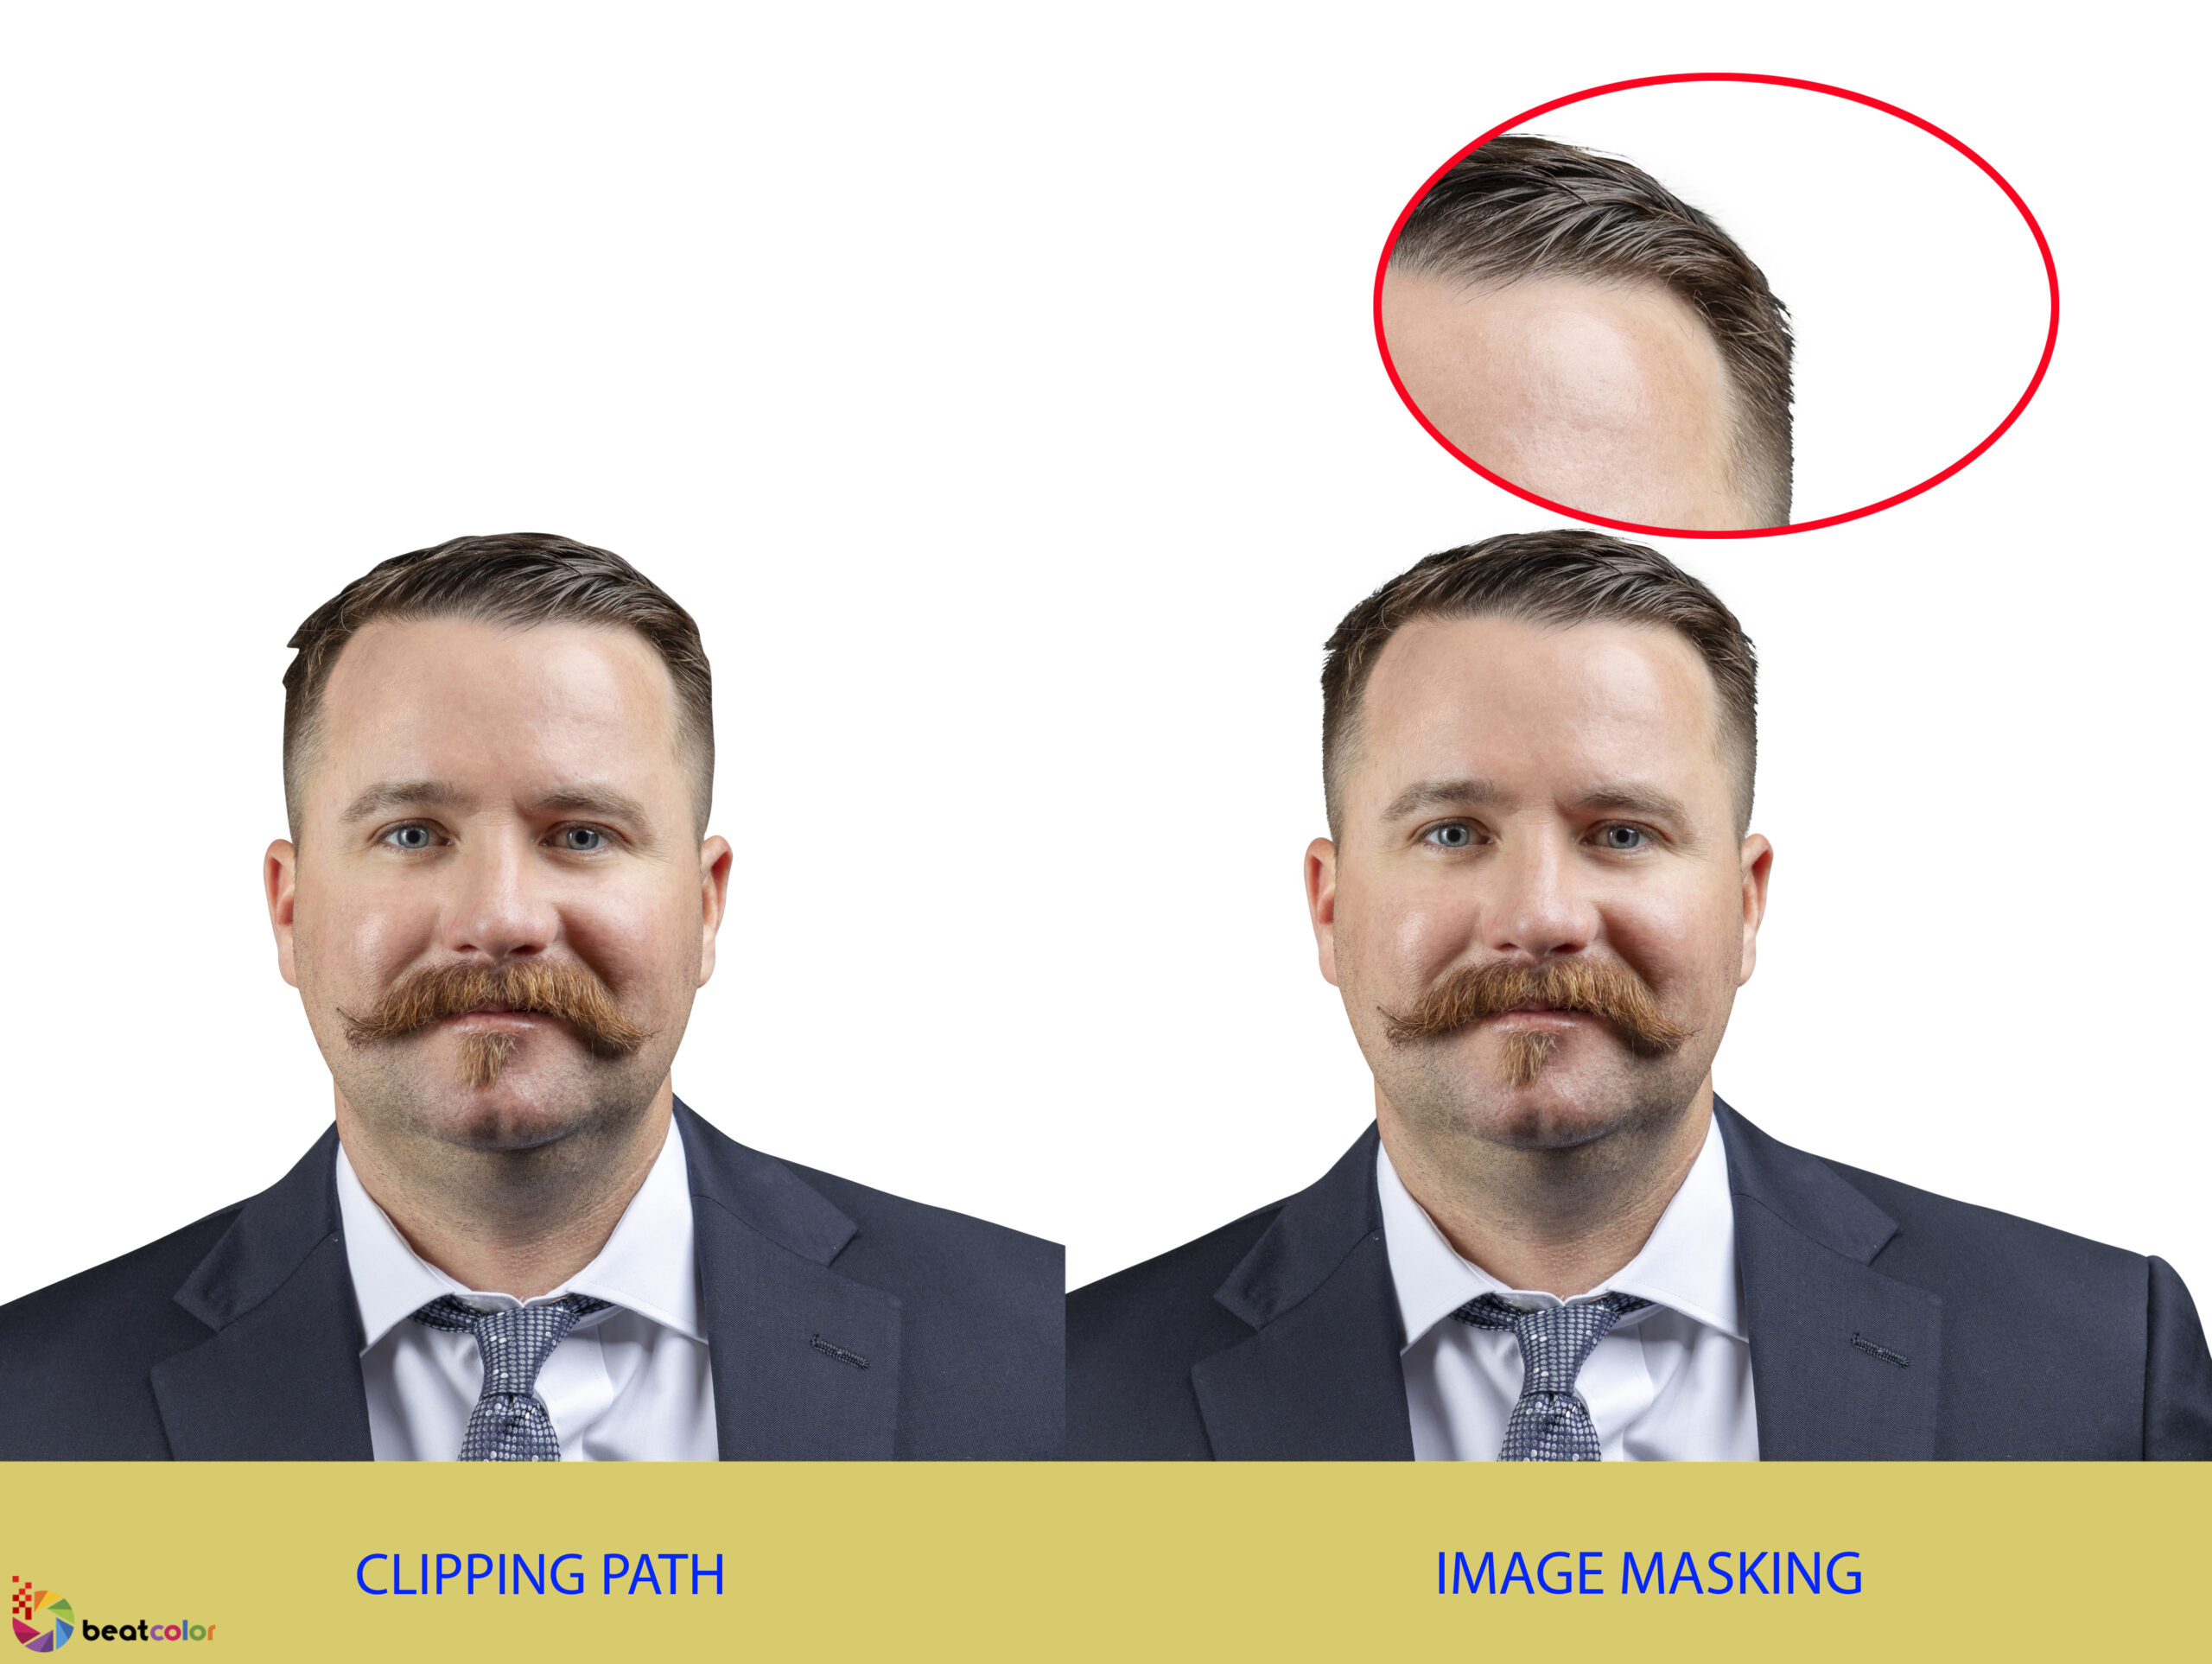 Clipping Path vs. Masking: What Do You Know?